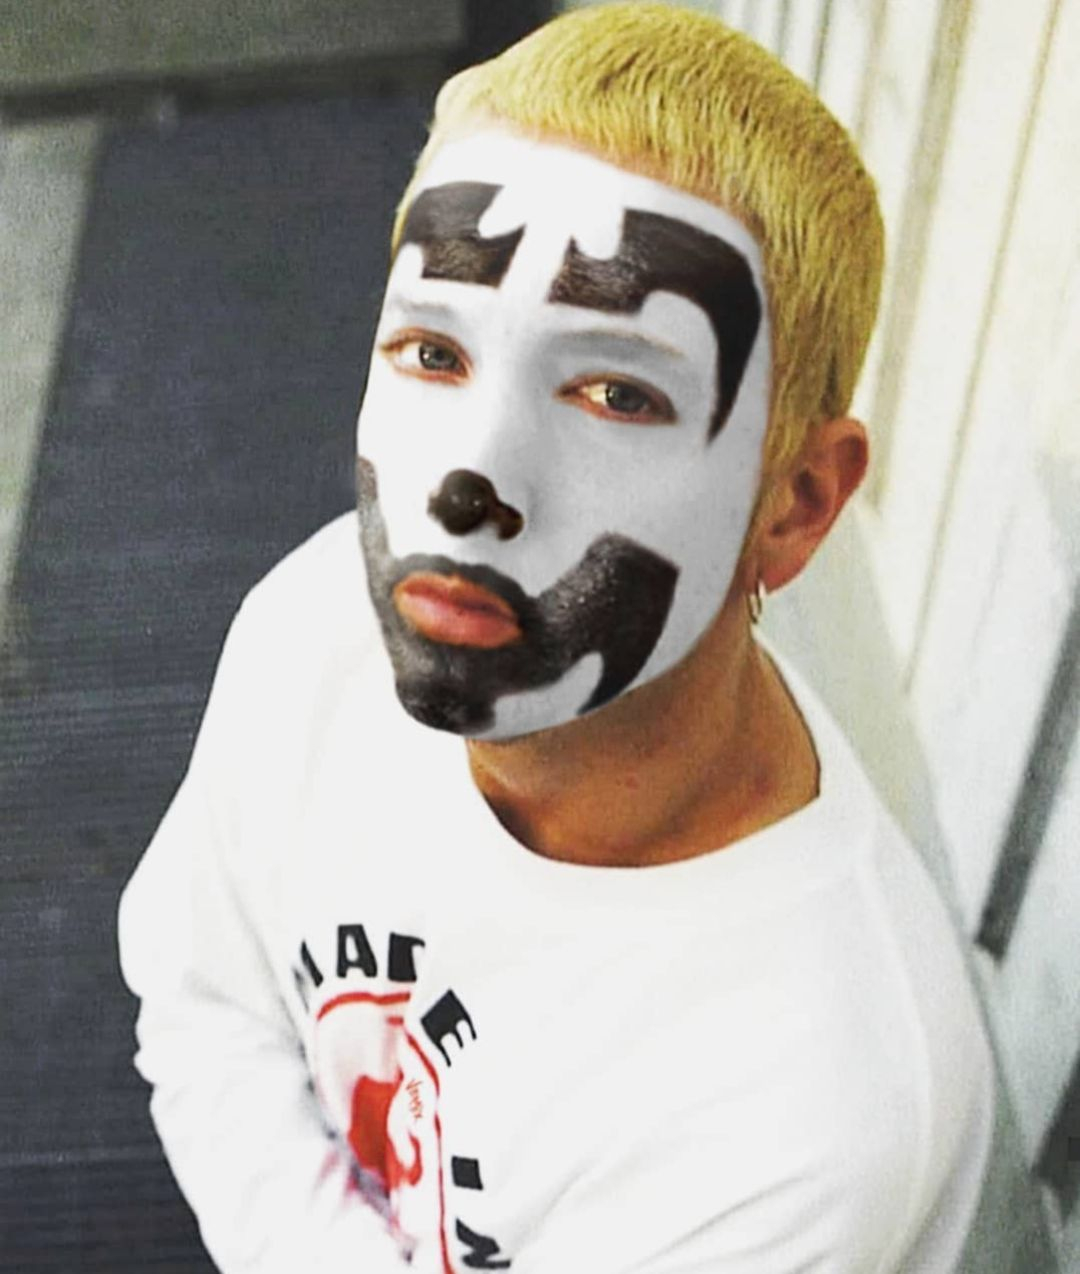 ...sporting the make-up of fellow Detroit rappers, The ICP, after Violent J...